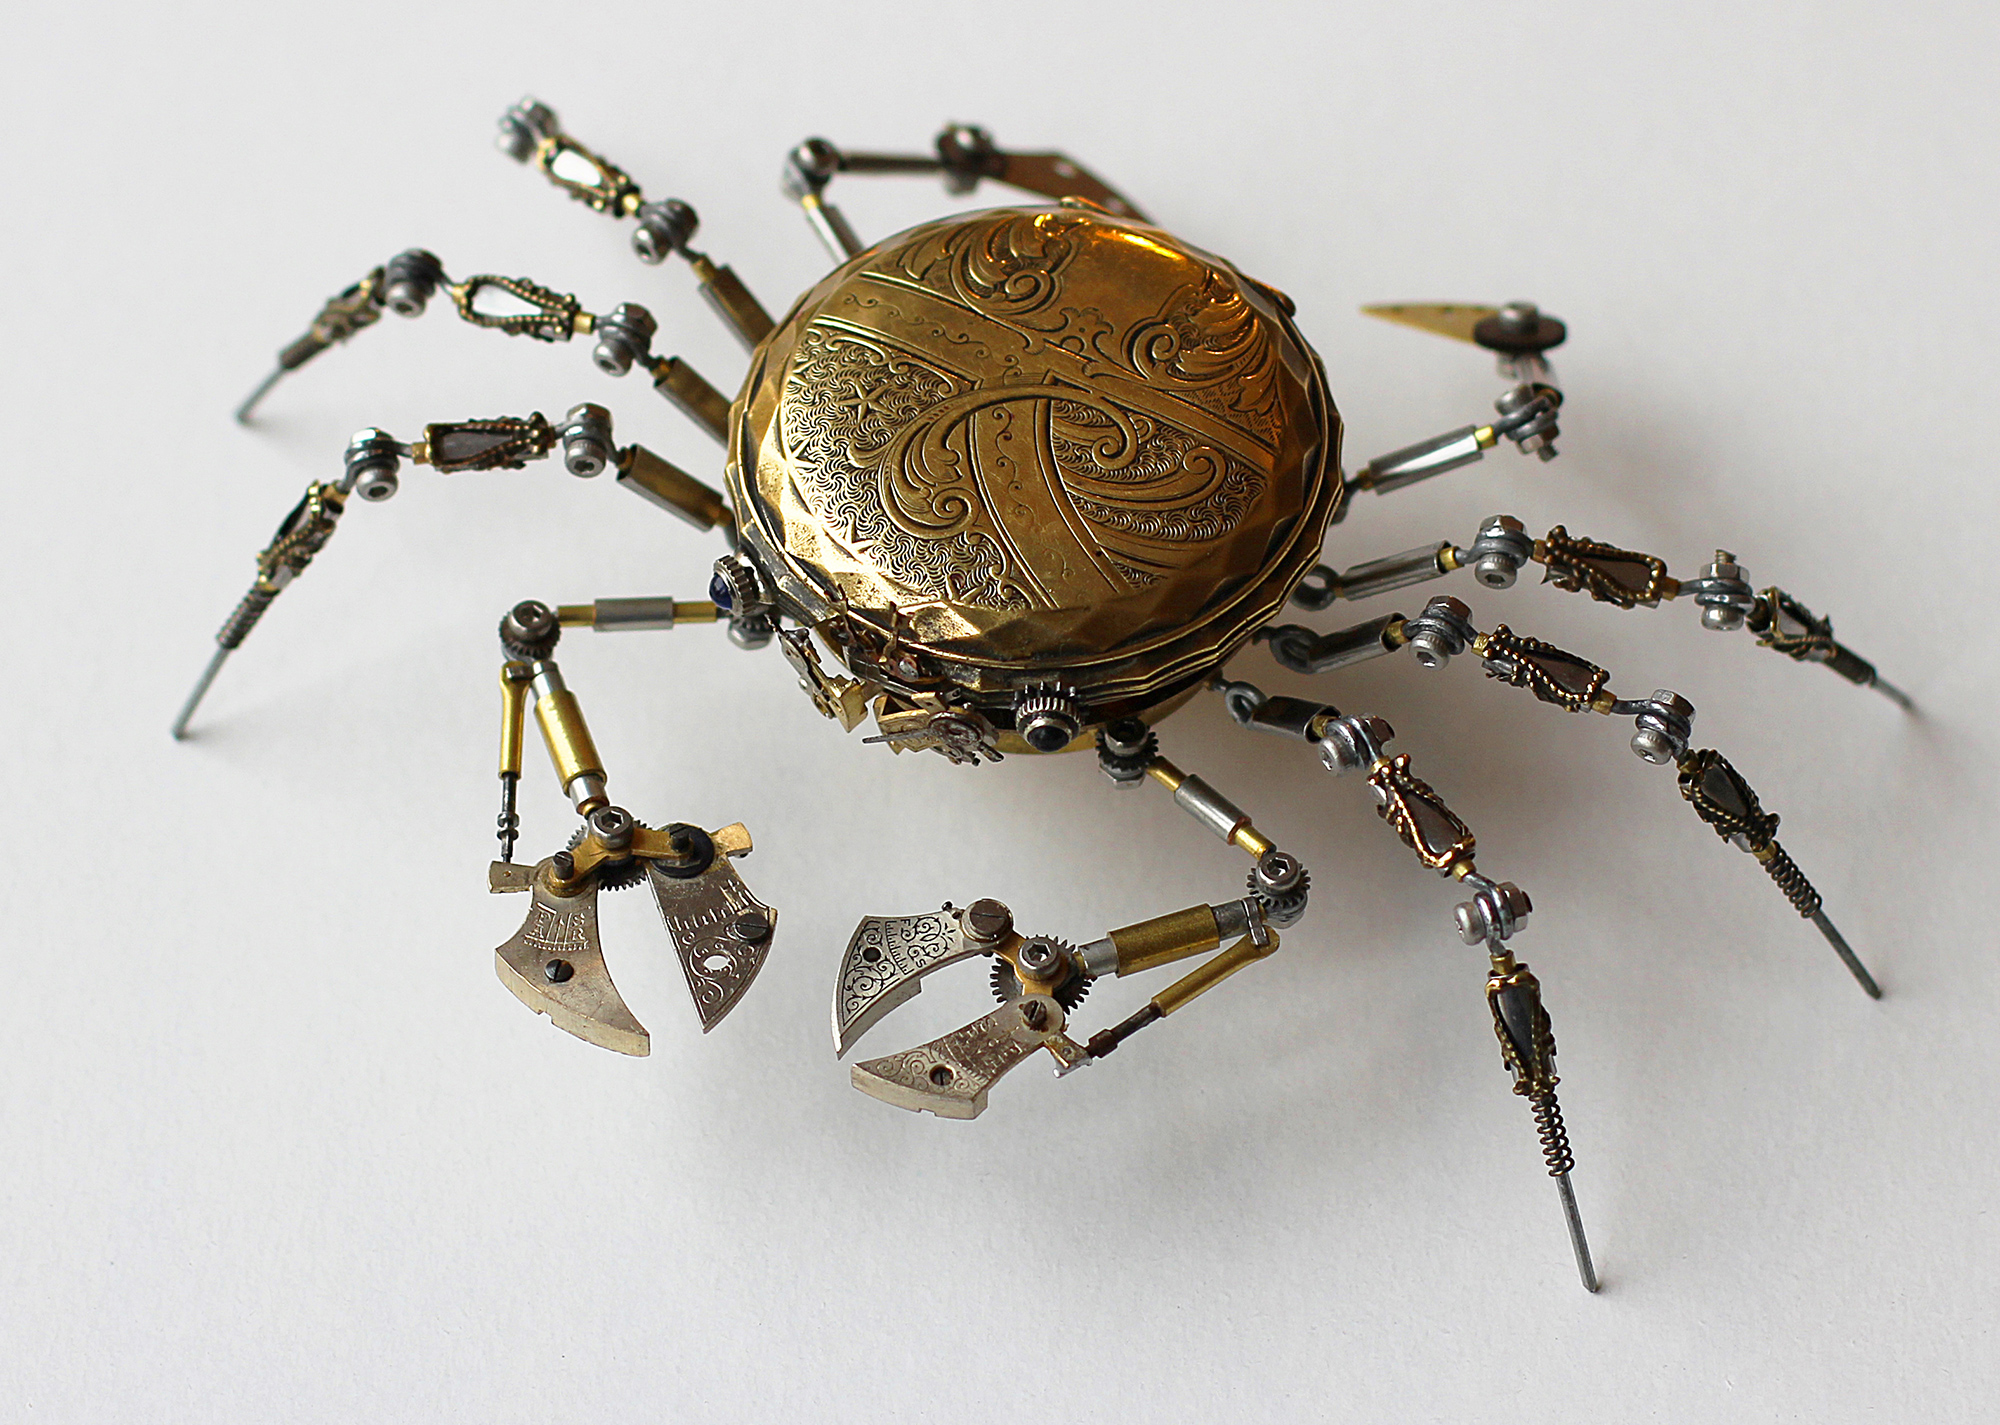 Antique Watches, Cameras, and Medical Equipment Morph Into Meticulous Steampunk Spiders | 国外美陈 美陈网站 美陈前沿 